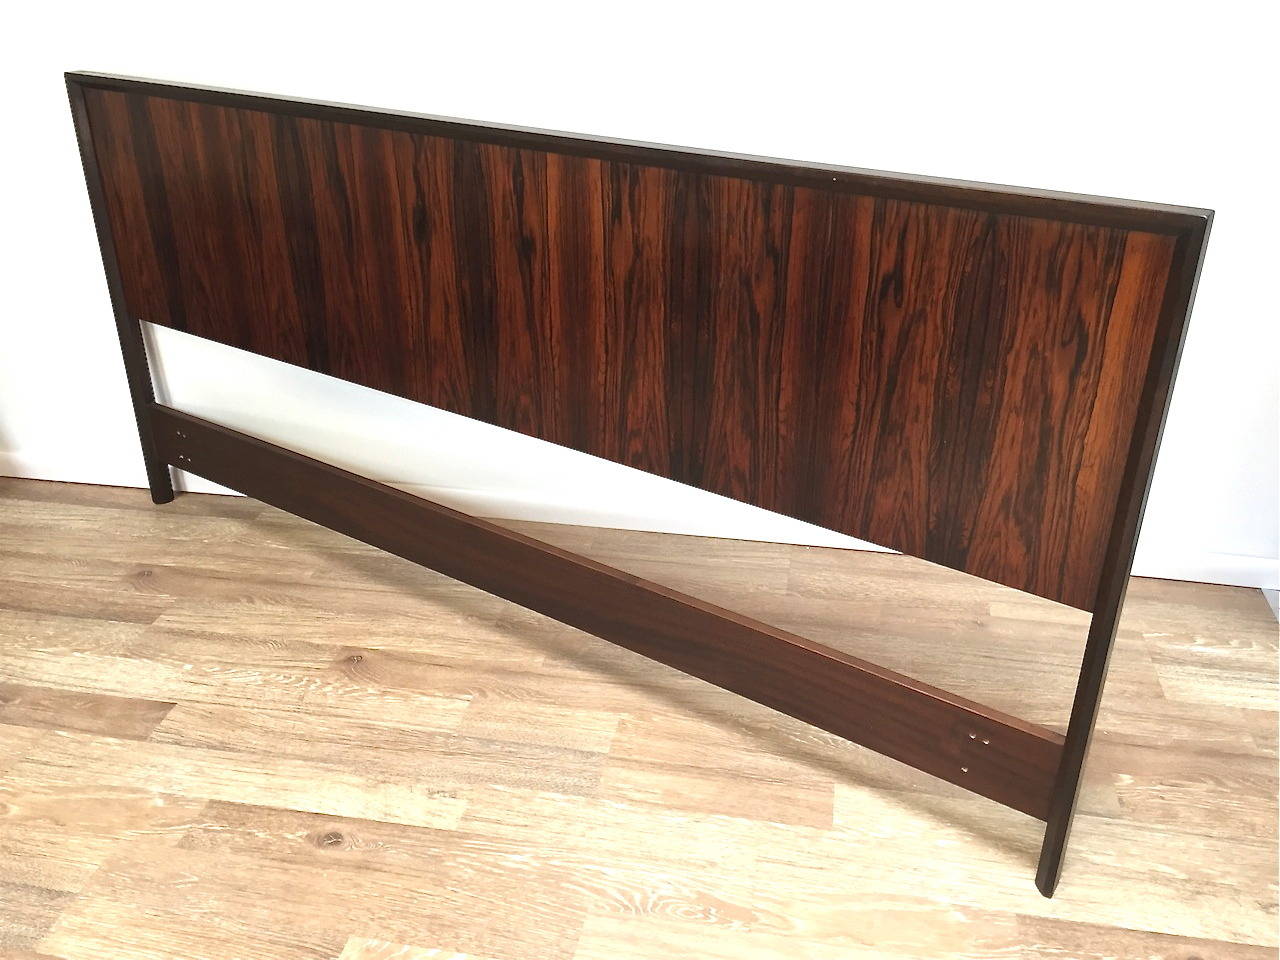 Rare Danish Modern Rosewood King Headboard with Matching Nightstands by Westnofa 1